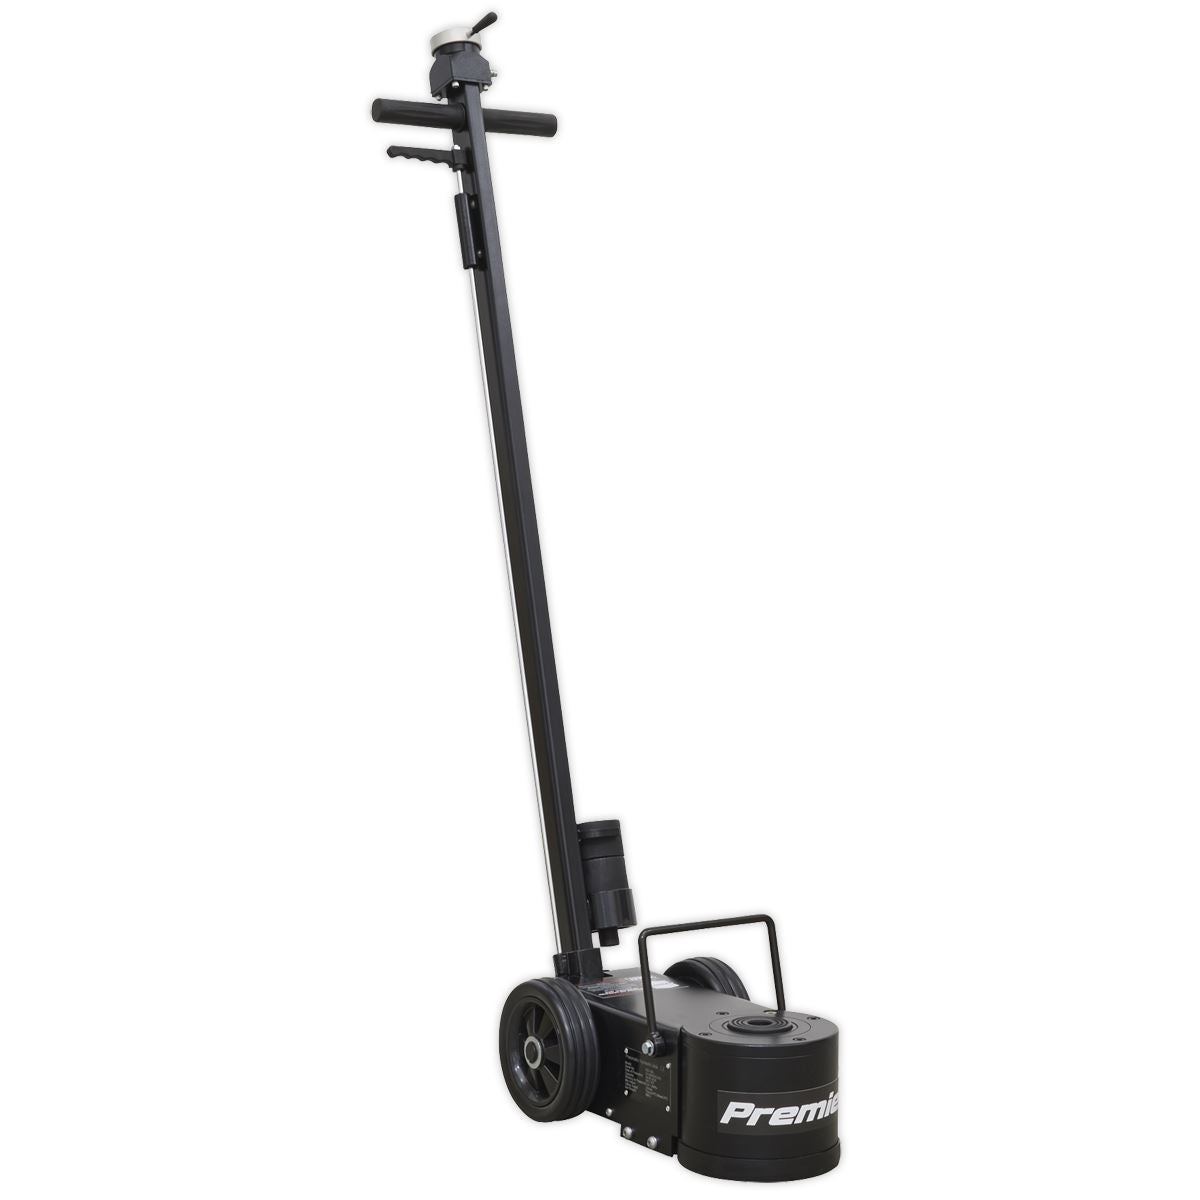 Sealey Premier Air Operated Jack 15-30 Tonne Telescopic